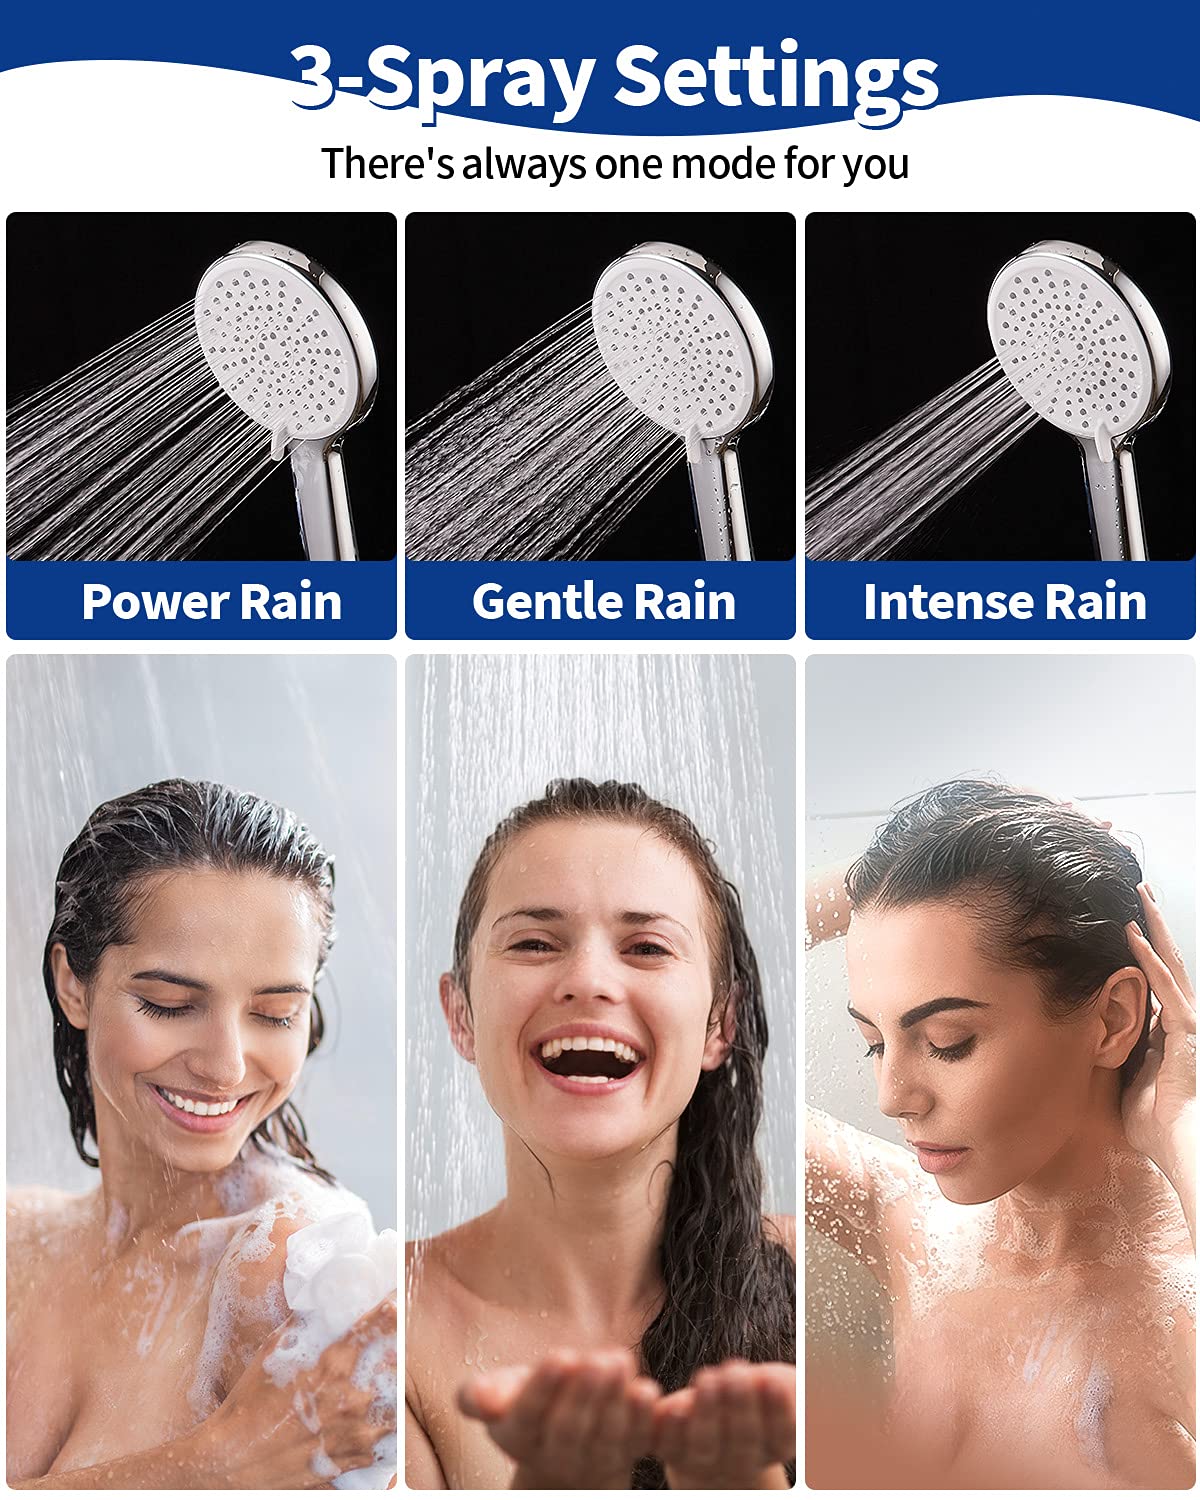 High Pressure Handheld Shower Head VMASSTONE 3-Setting Shower head Kit - Jet Water Mode - with 59" Stainless Hose and Adjustable Mount Excellent Replacement for Bath Showerhead (HM-001 Chrome)